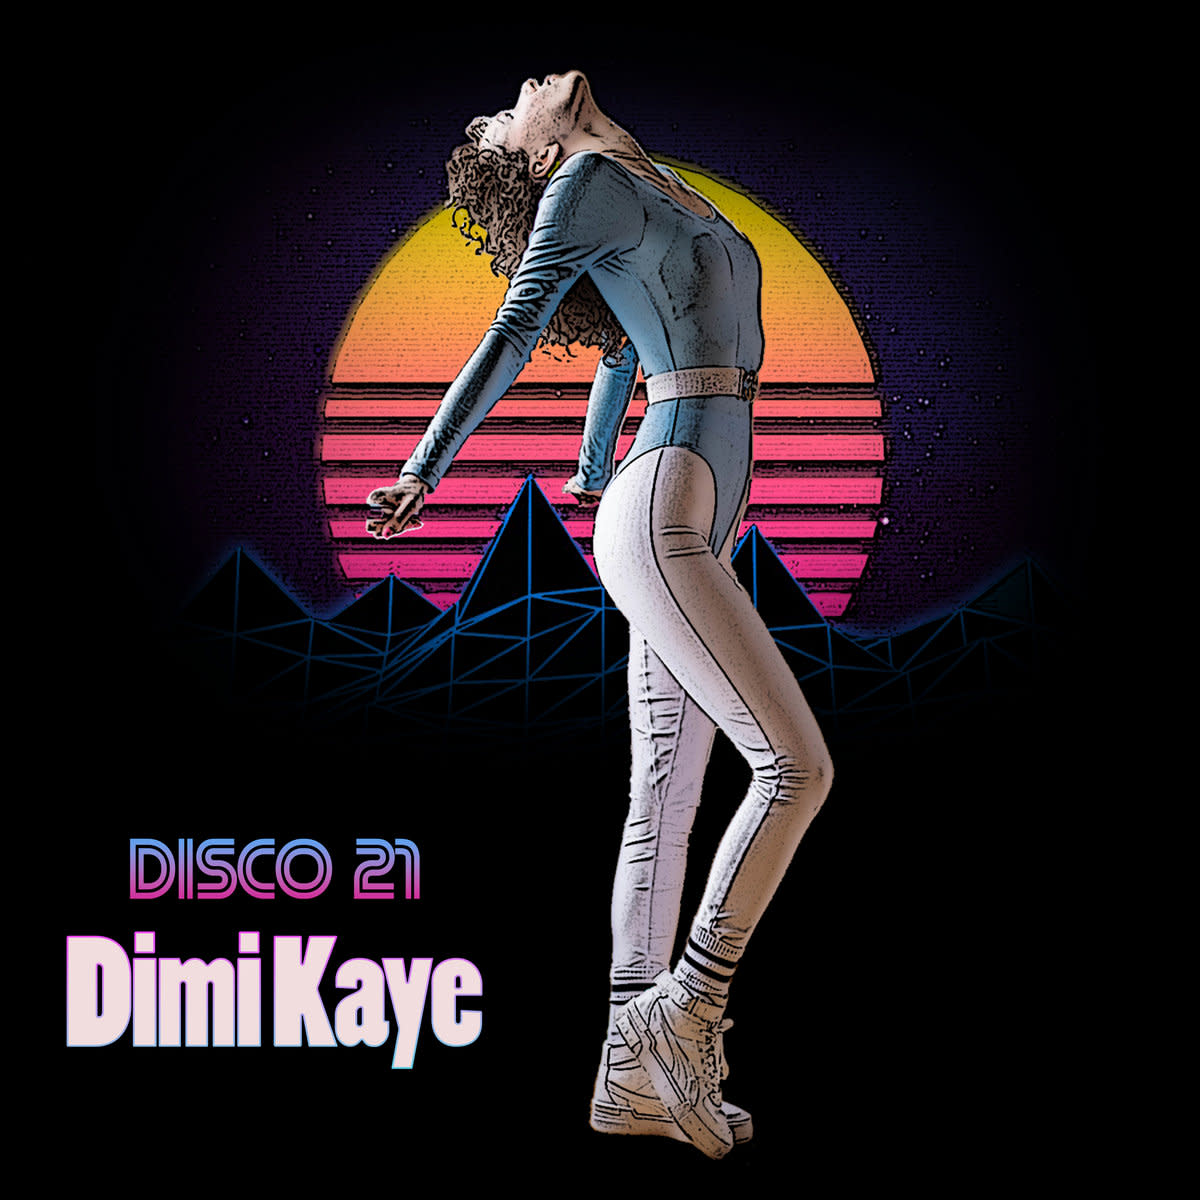 synth-ep-review-disco-21-by-dimi-kaye